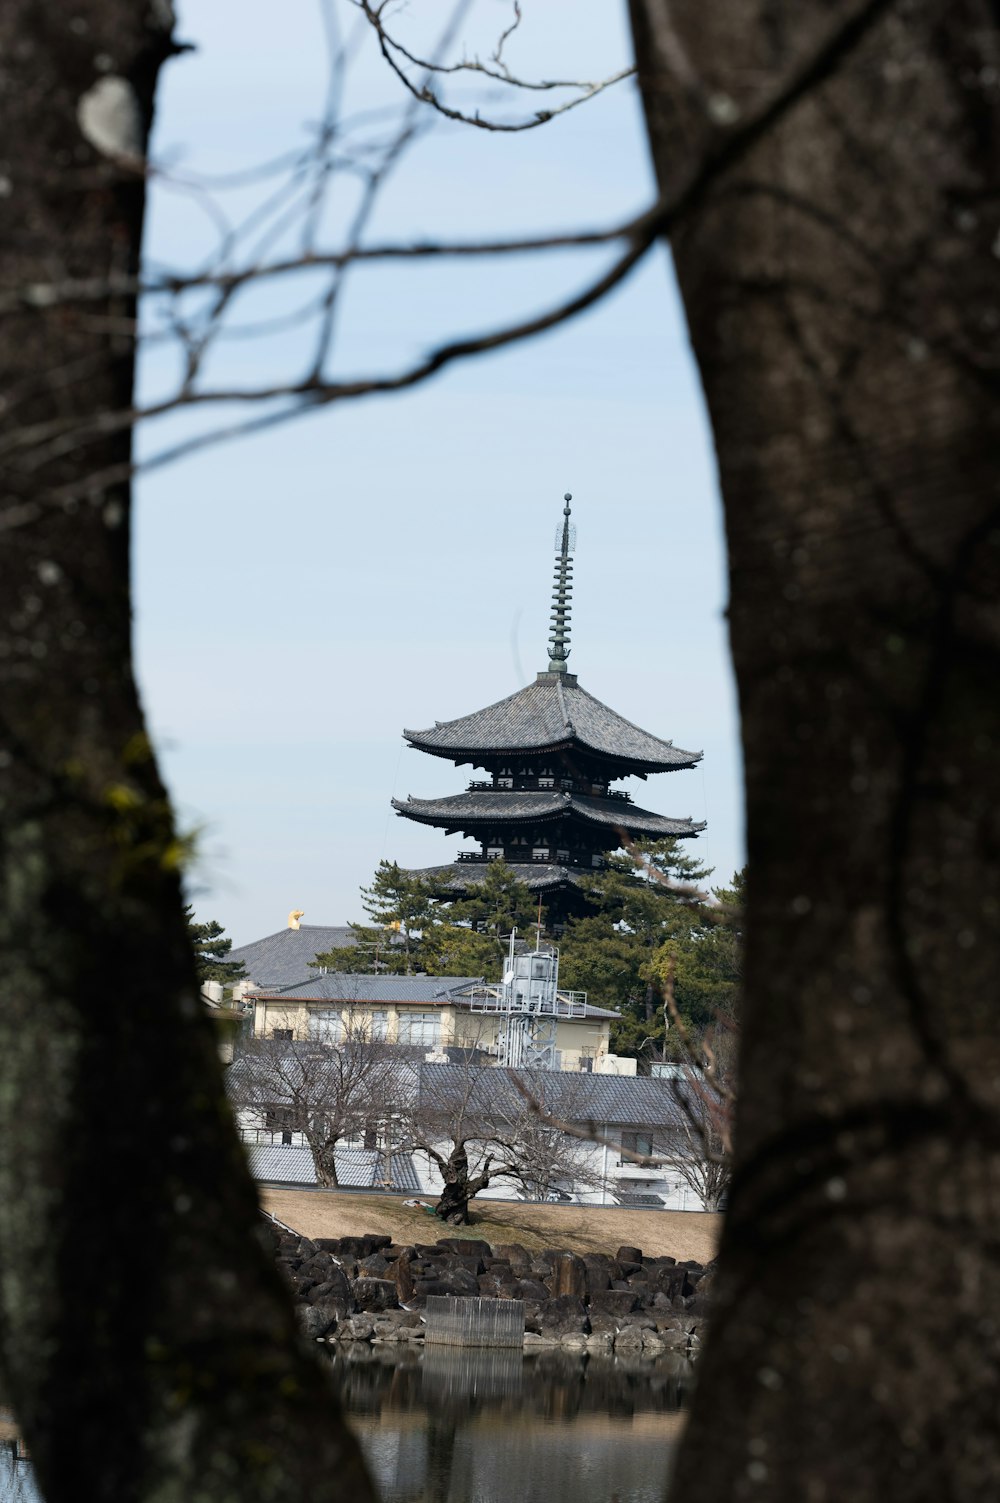 a view of a pagoda through some trees